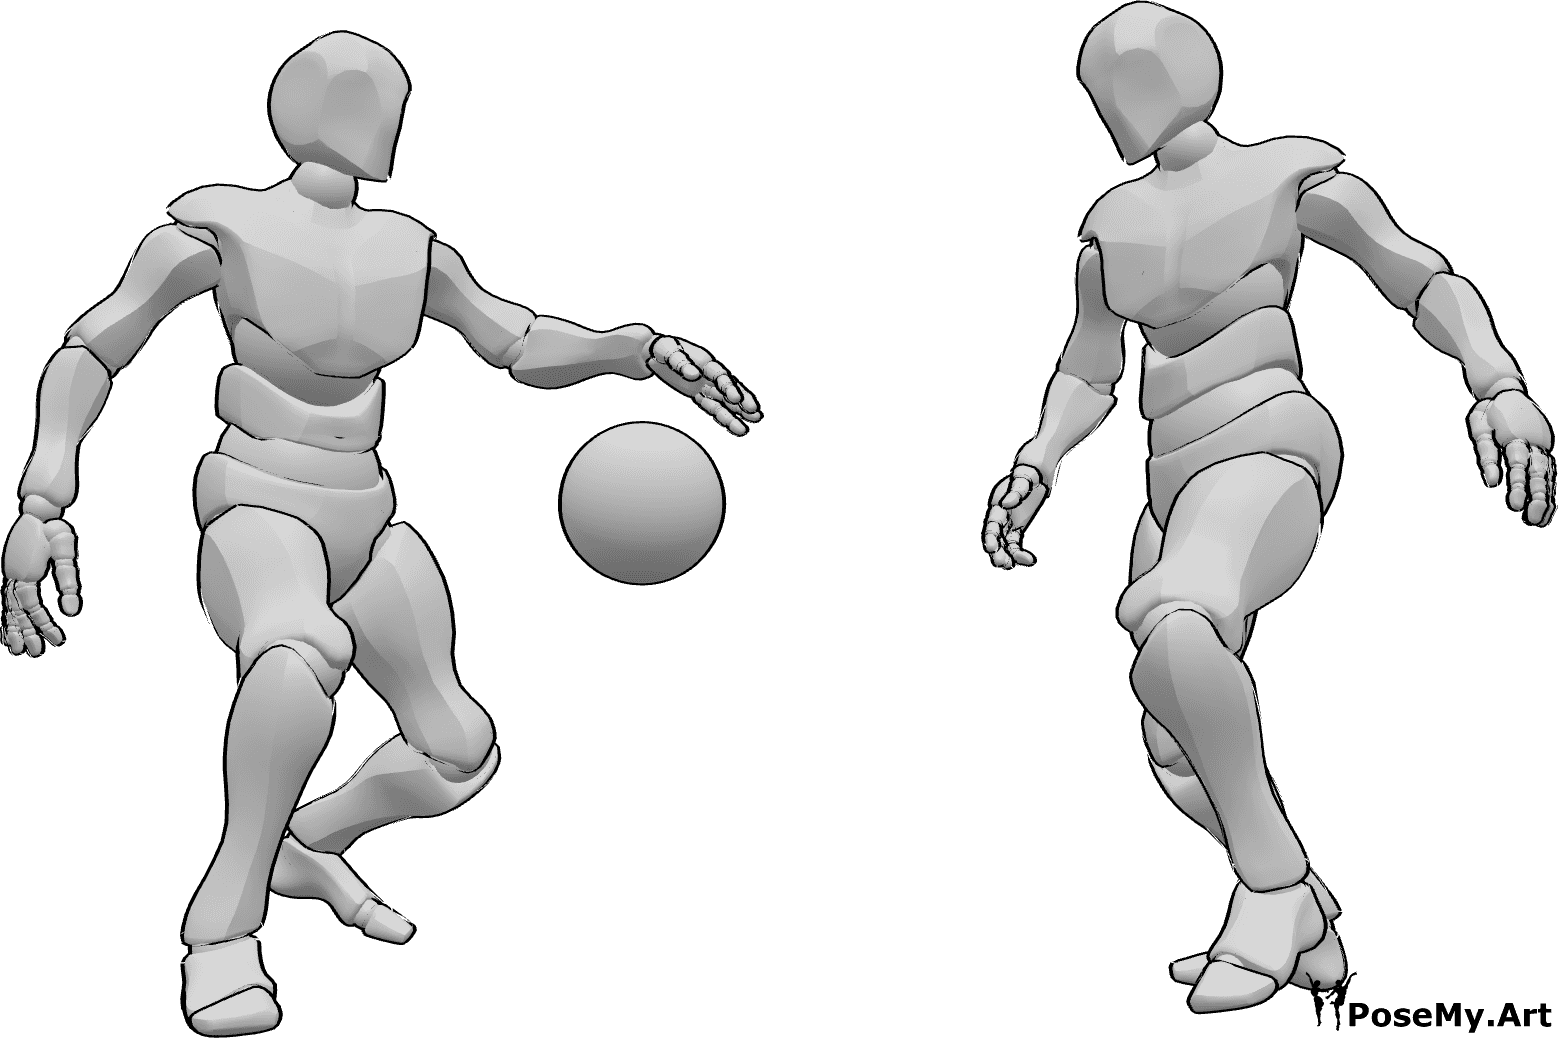 Pose Reference- Two males basketball pose - Two males are playing basketball, one of them is dribbling the ball